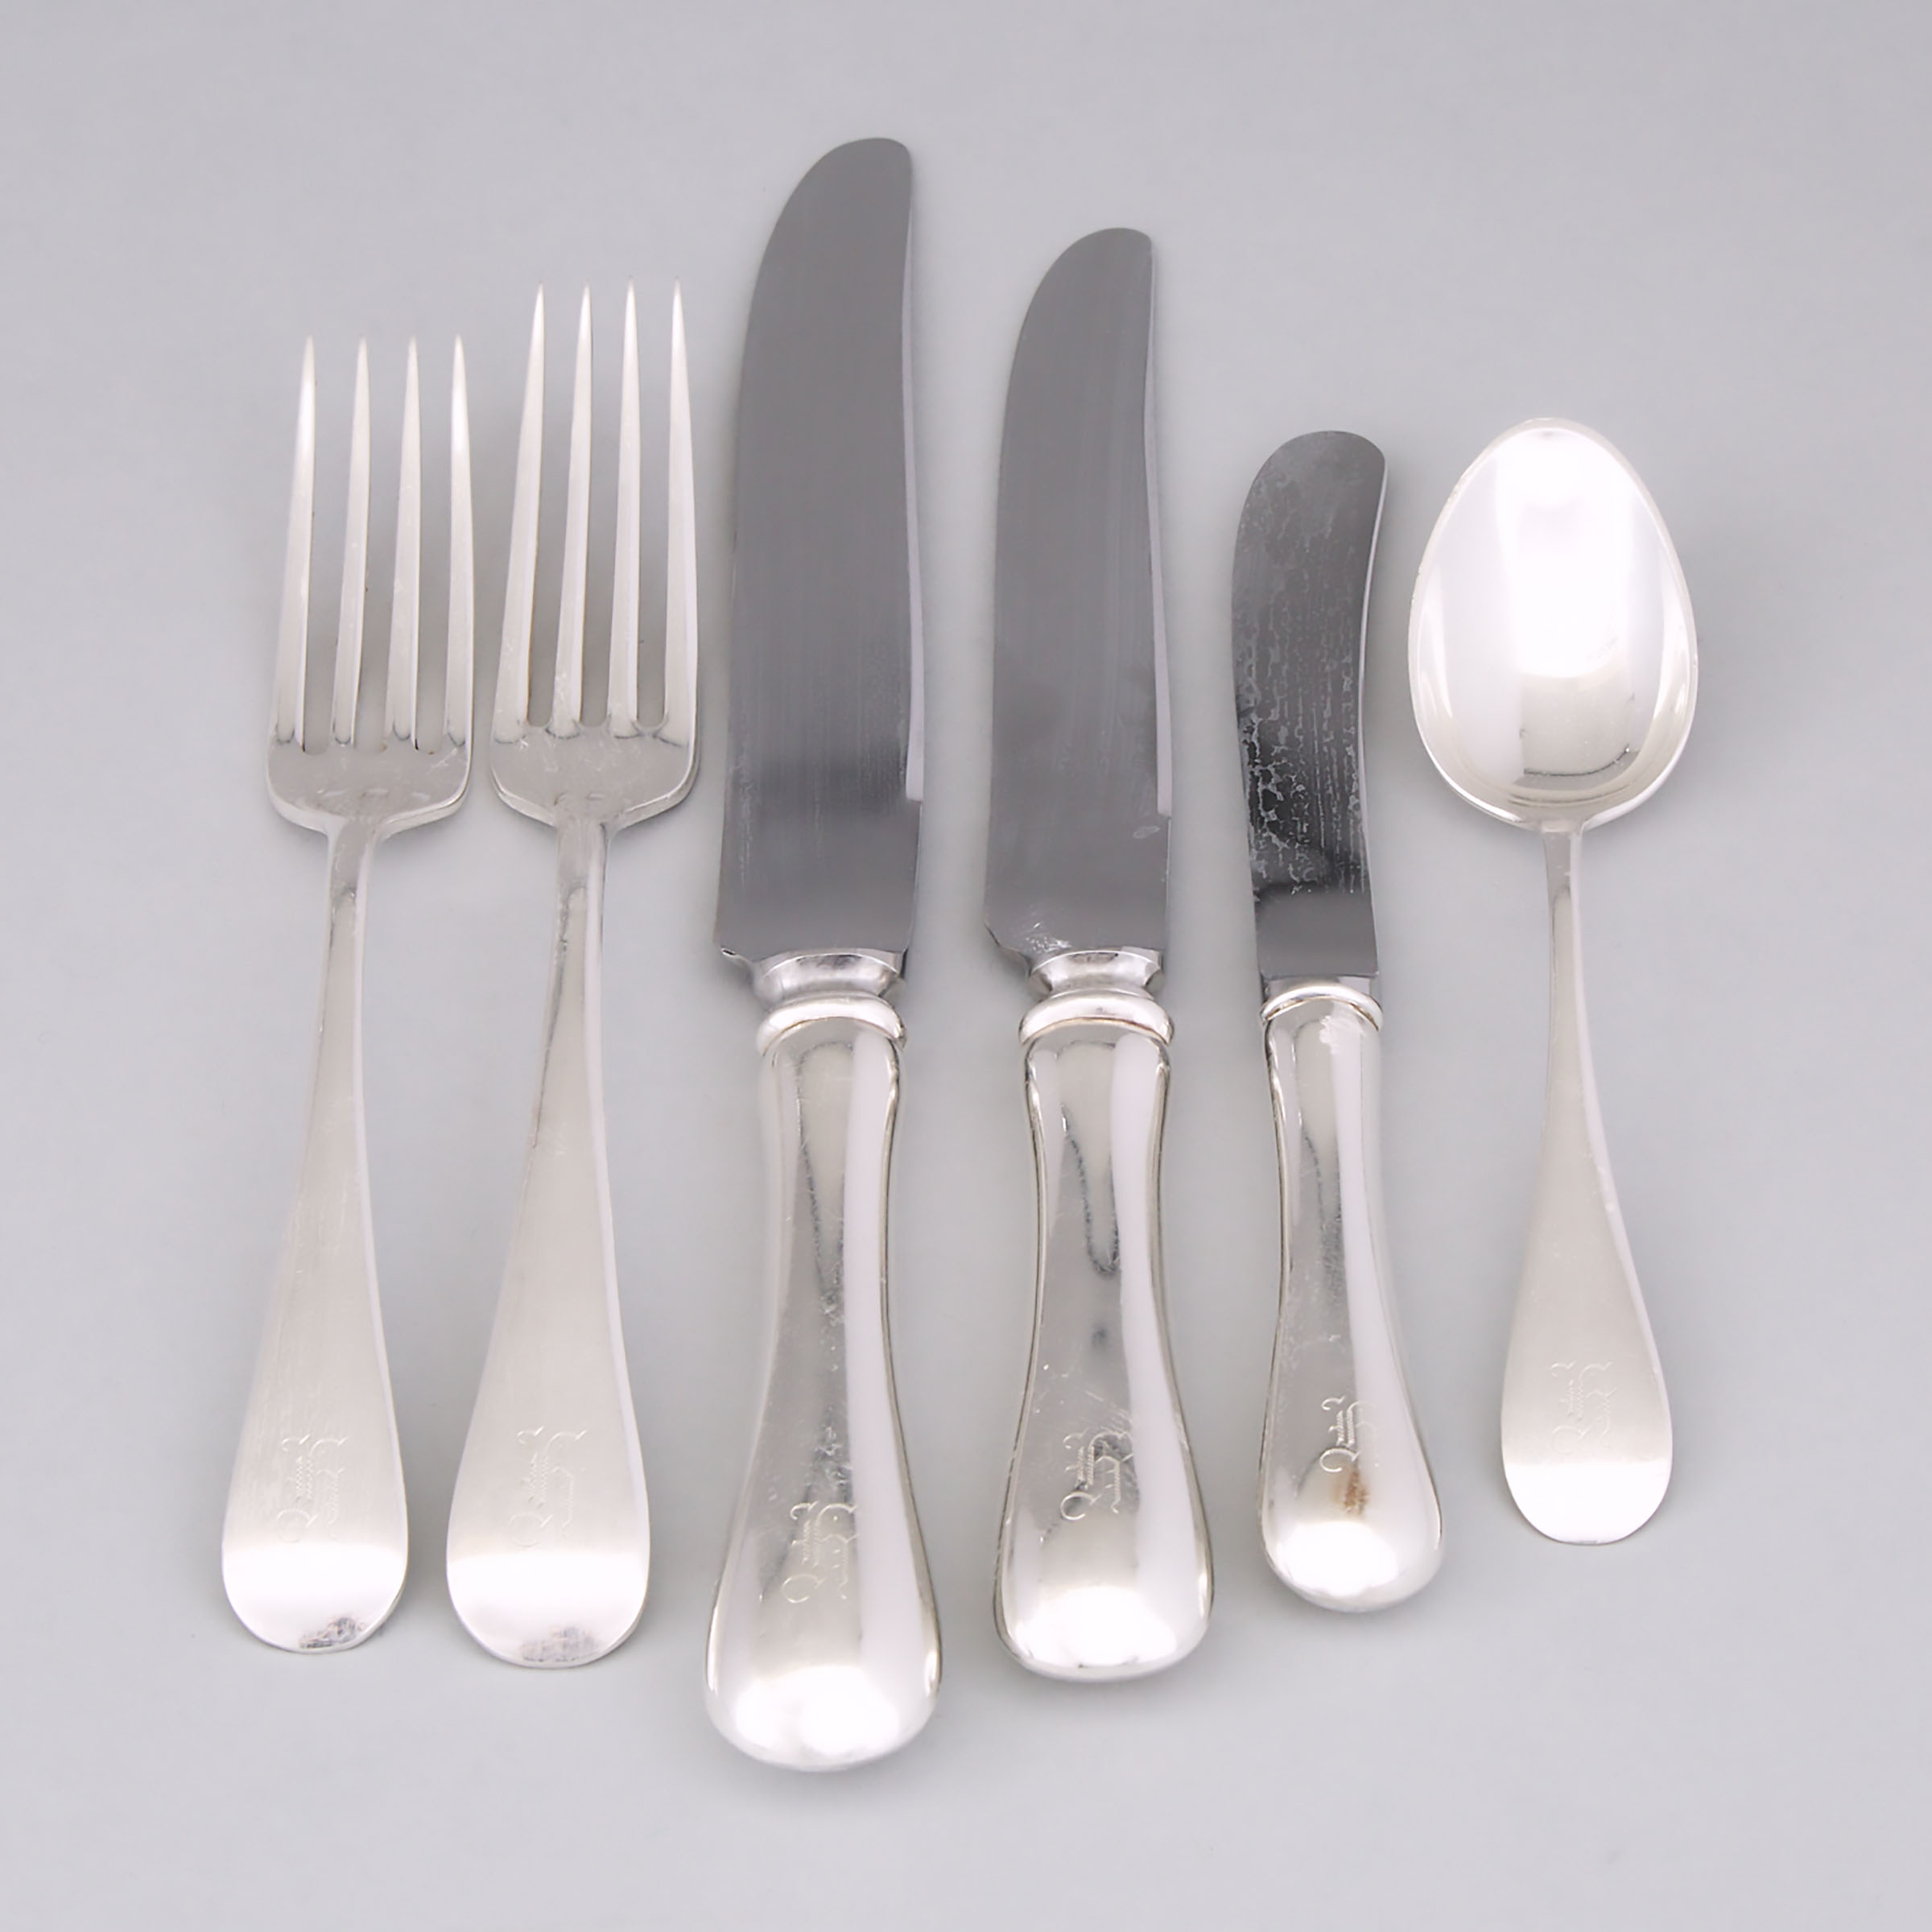 Canadian Silver ‘Old English’ Pattern Flatware Service, Roden Bros., Toronto, Ont., 20th century